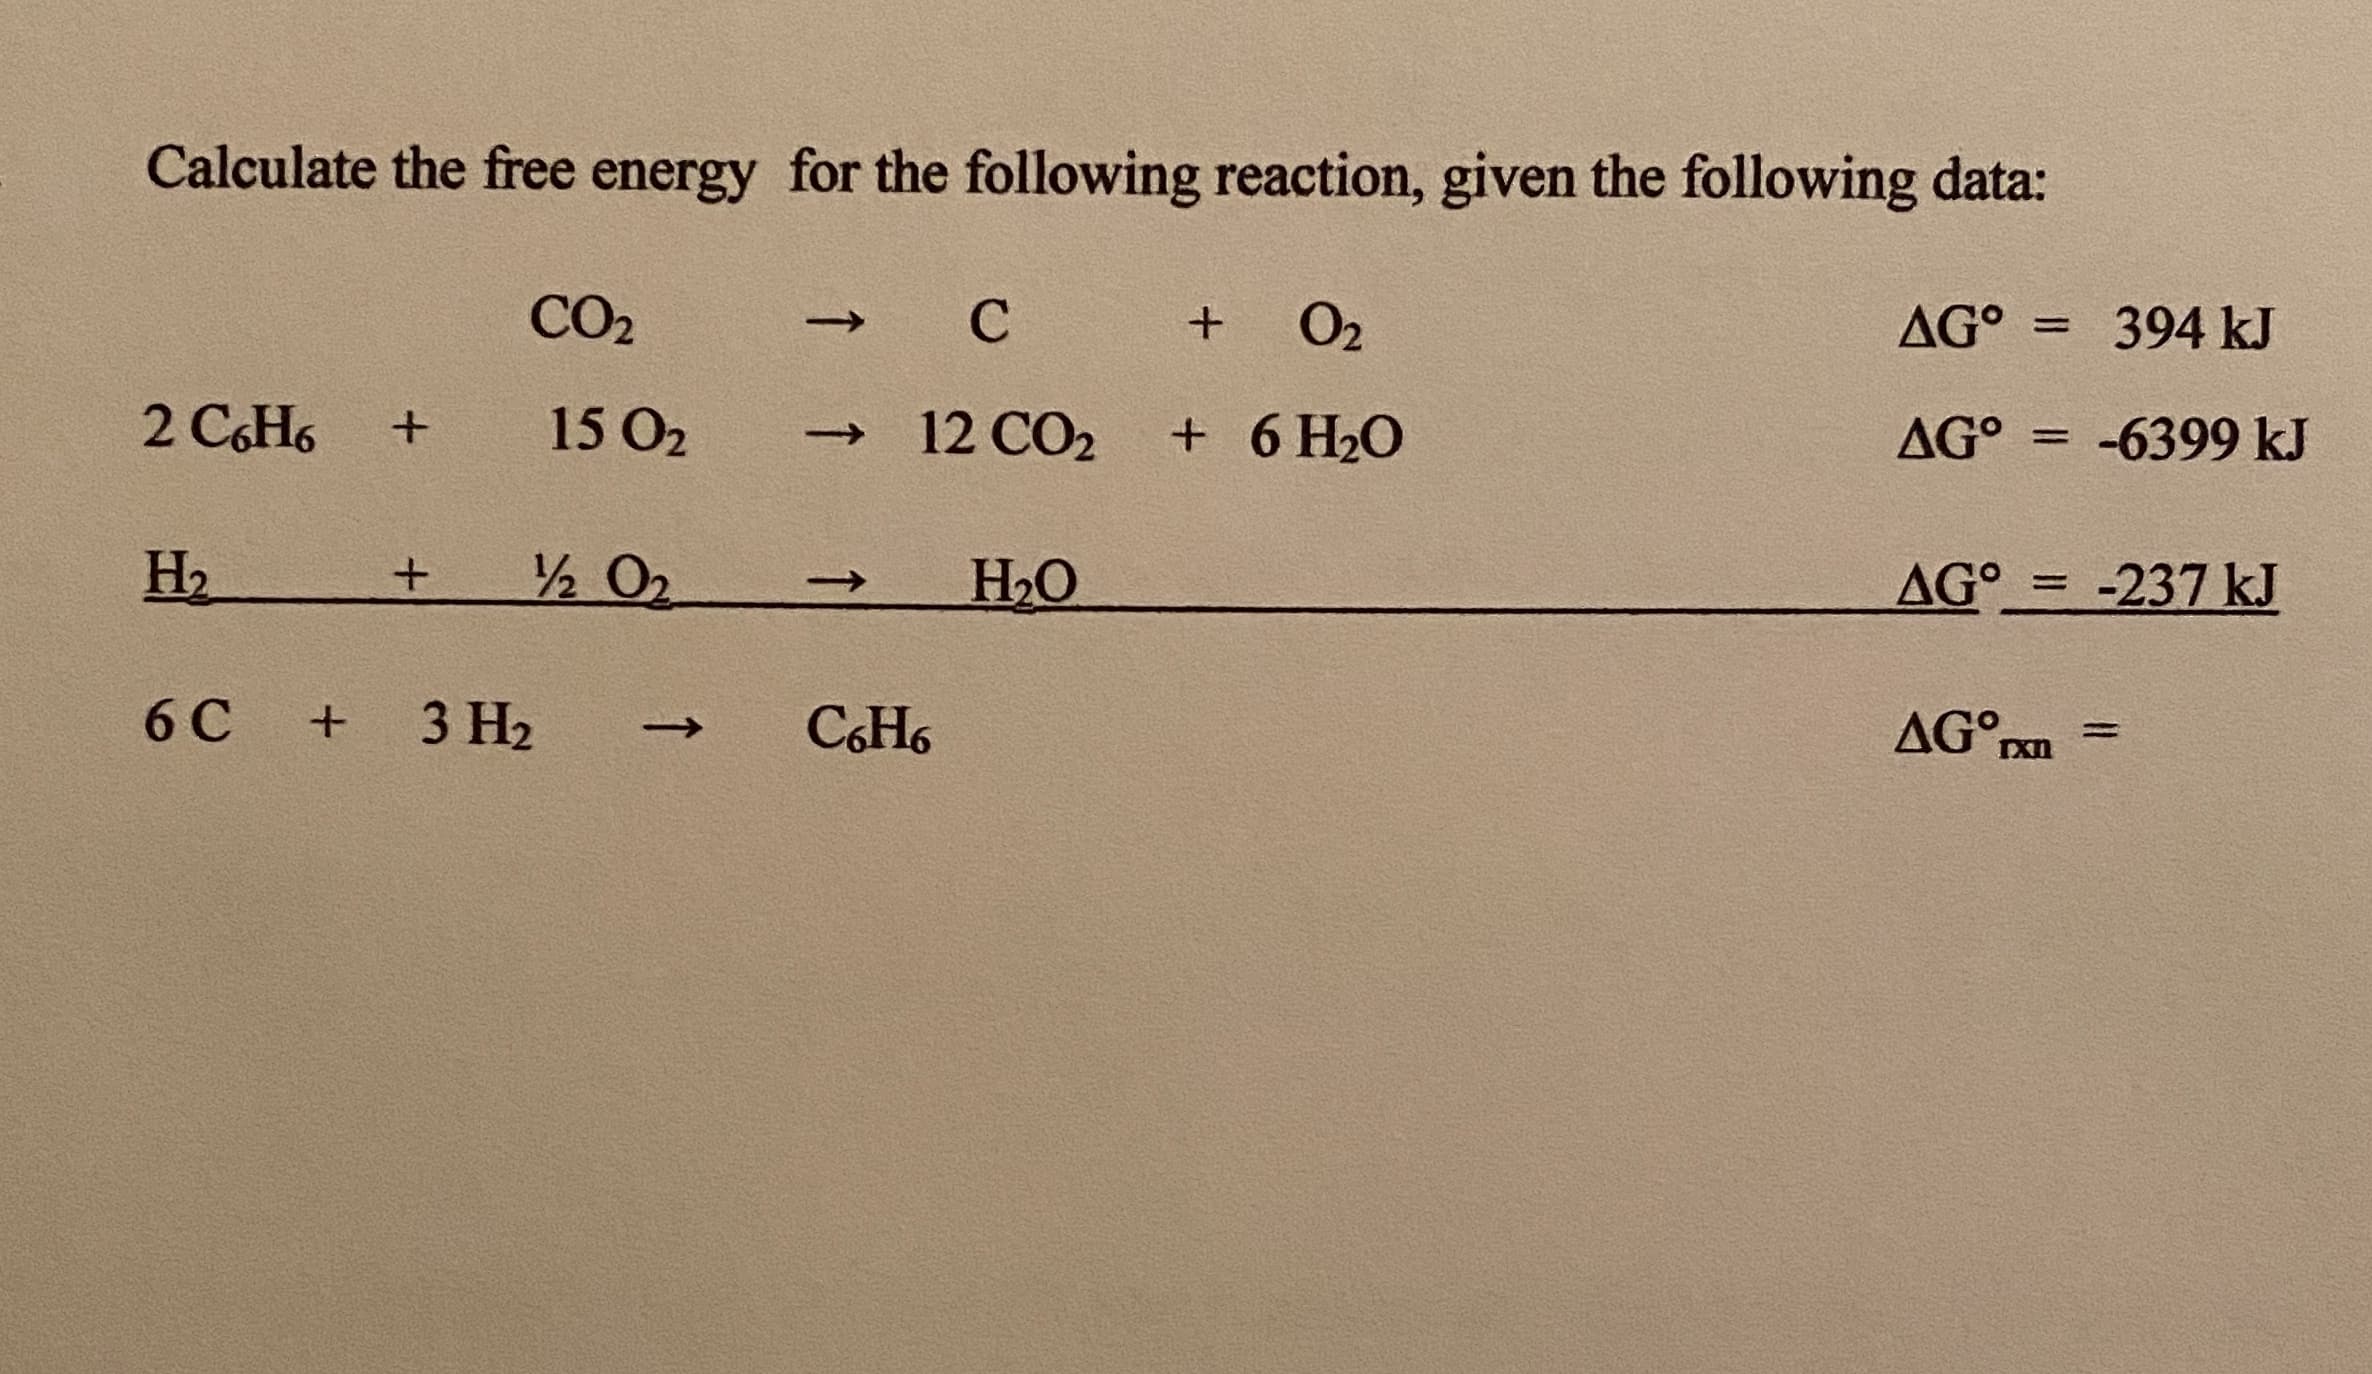 Calculate the free energy for the following reaction, given the following data:
CO2
O2
AG°
394 kJ
->
%3D
2 C,H6
15 O2
→ 12 CO2
+ 6 H20
AG°
-6399 kJ
%3D
H2
2 O2
H2O
AG°= -237 kJ
->
6 C
3 H2
CH6
AG°pxn
+
